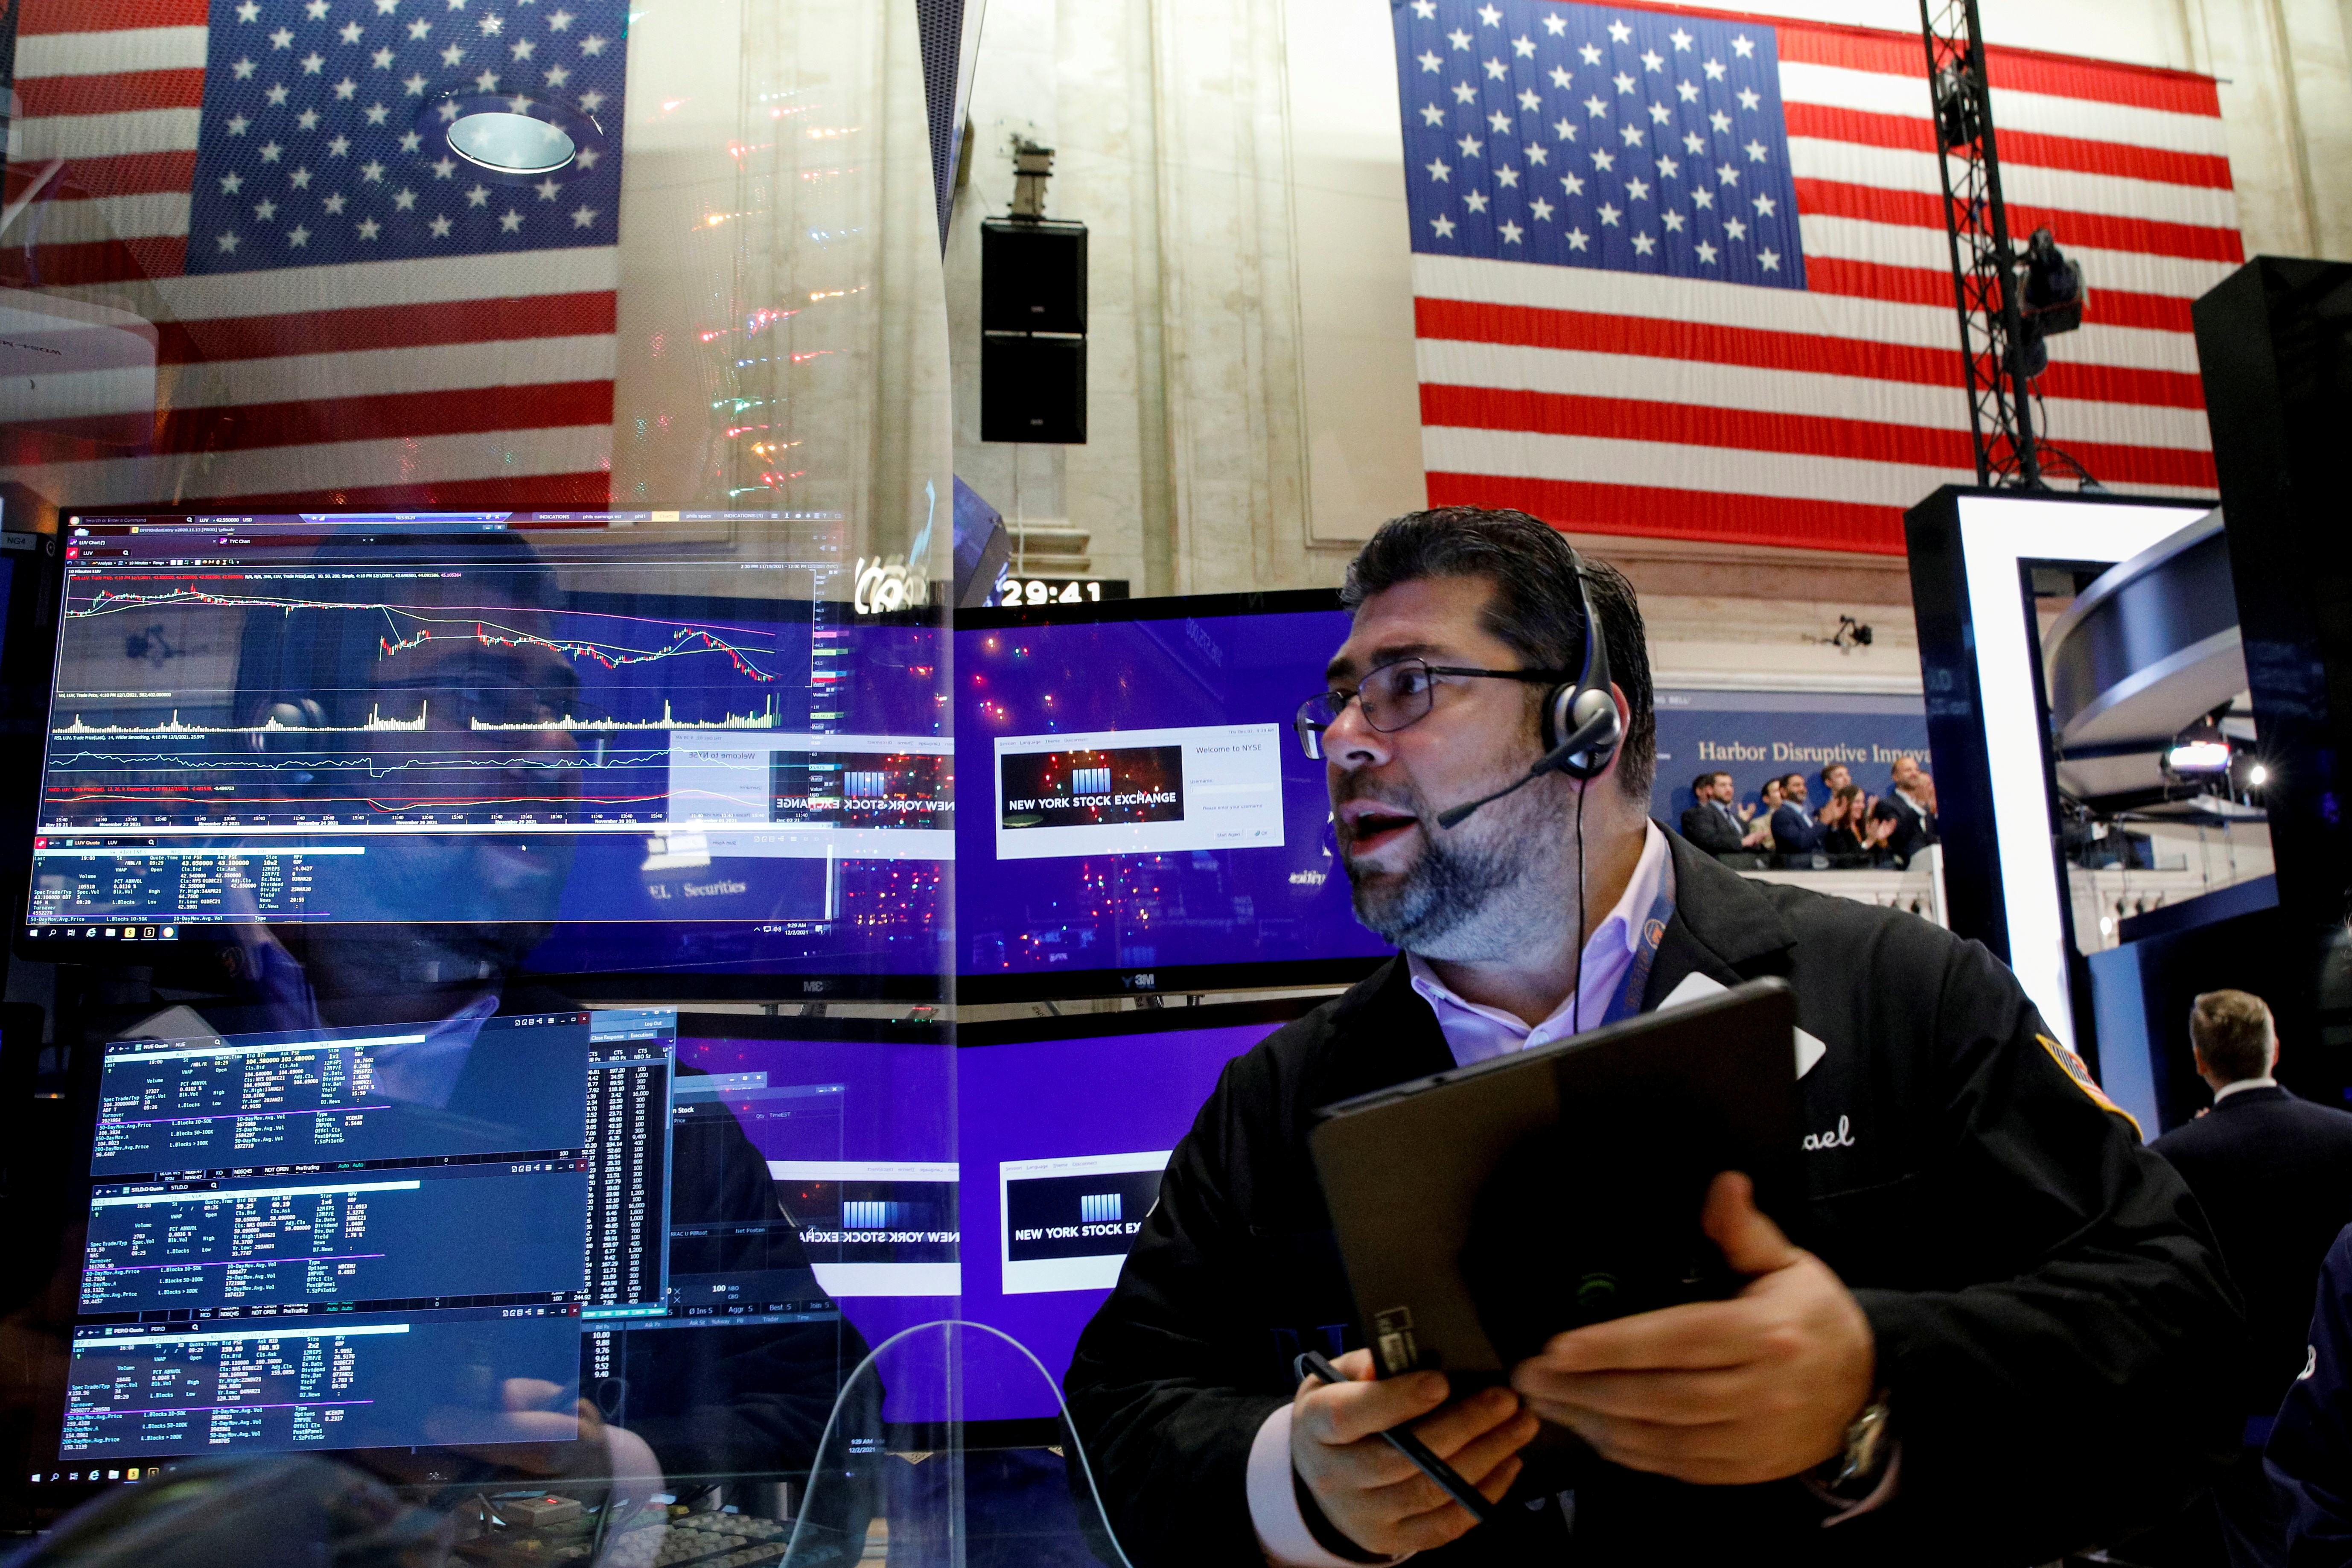 A trader works on the floor of the NYSE in New York